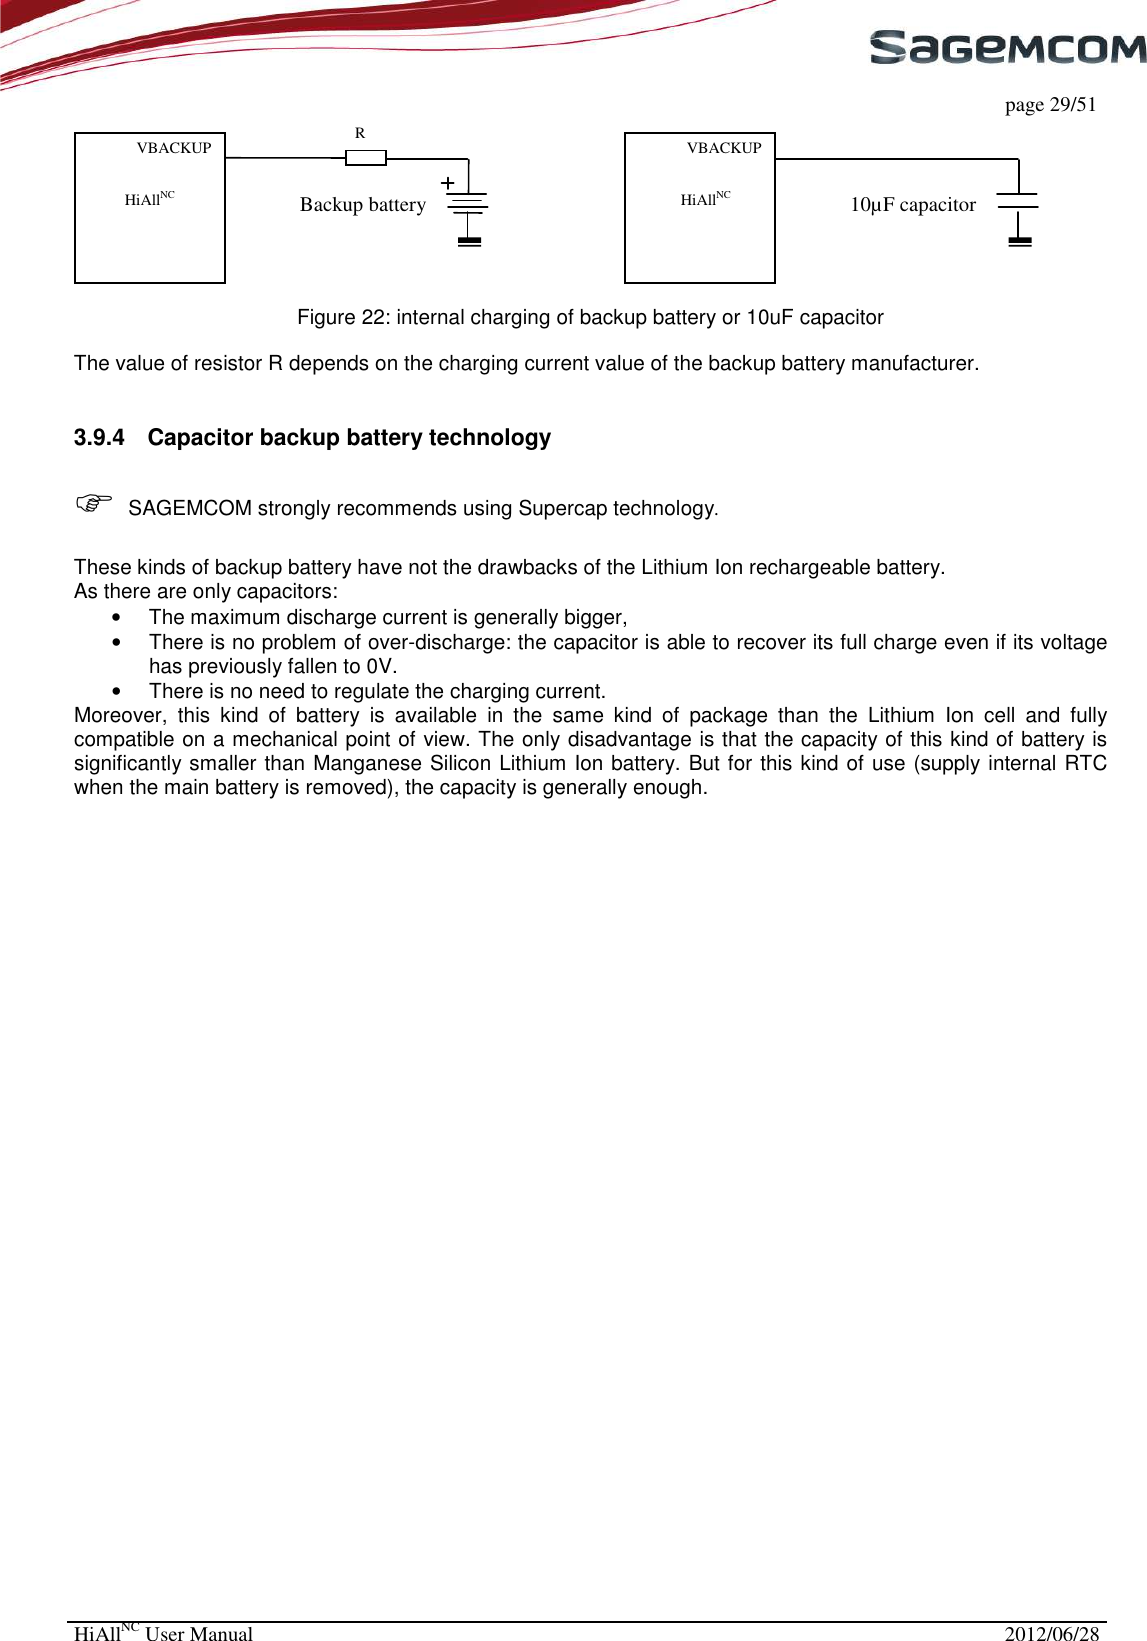     page 29/51 HiAllNC User Manual  2012/06/28                             Figure 22: internal charging of backup battery or 10uF capacitor  The value of resistor R depends on the charging current value of the backup battery manufacturer.  3.9.4  Capacitor backup battery technology    SAGEMCOM strongly recommends using Supercap technology.  These kinds of backup battery have not the drawbacks of the Lithium Ion rechargeable battery. As there are only capacitors: •  The maximum discharge current is generally bigger, •  There is no problem of over-discharge: the capacitor is able to recover its full charge even if its voltage has previously fallen to 0V. •  There is no need to regulate the charging current. Moreover,  this  kind  of  battery  is  available  in  the  same  kind  of  package  than  the  Lithium  Ion  cell  and  fully compatible on a mechanical point of view. The only disadvantage is that the capacity of this kind of battery is significantly smaller than Manganese Silicon Lithium Ion battery. But for this kind of use (supply internal RTC when the main battery is removed), the capacity is generally enough. VBACKUP  HiAllNC  10µF capacitor VBACKUP  HiAllNC  R Backup battery 